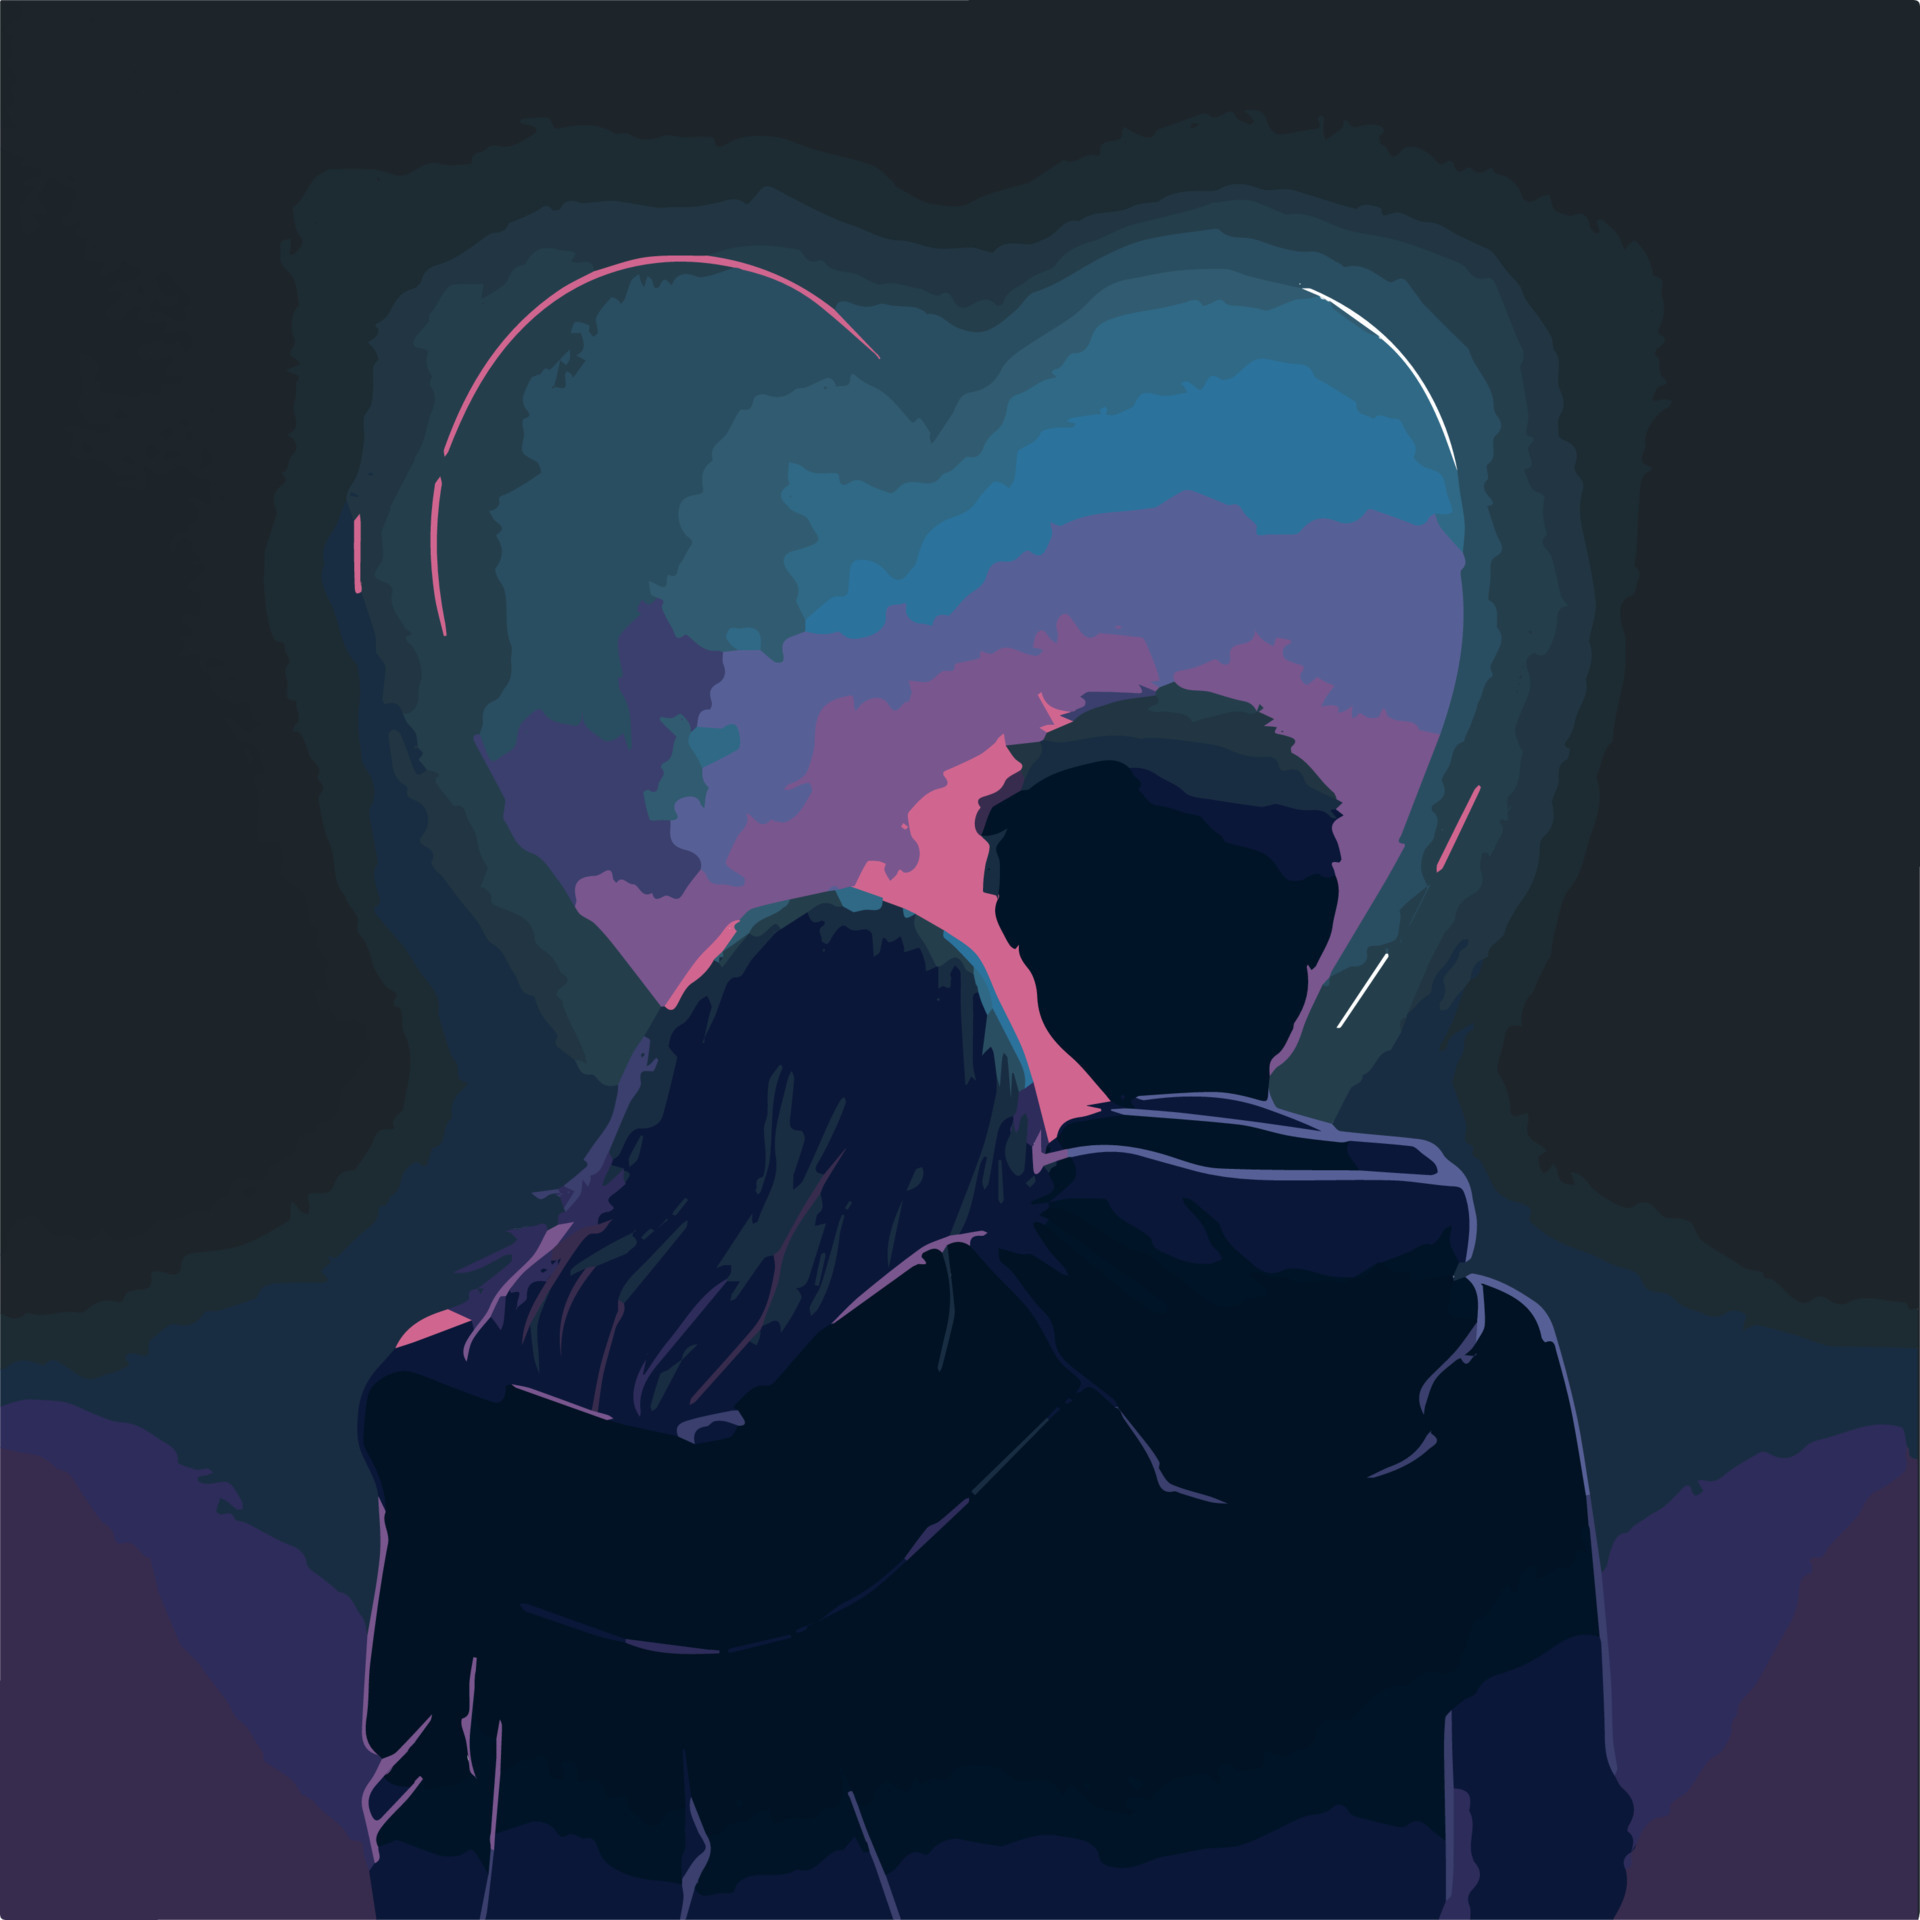 Young couple love vector art. Illustration of romance. Cute cartoon romantic  realtionship. Card for dating. Heart symbol. Isolated young love.  Silhouette, of new love Kissing in a romantic setting art 14487761 Vector